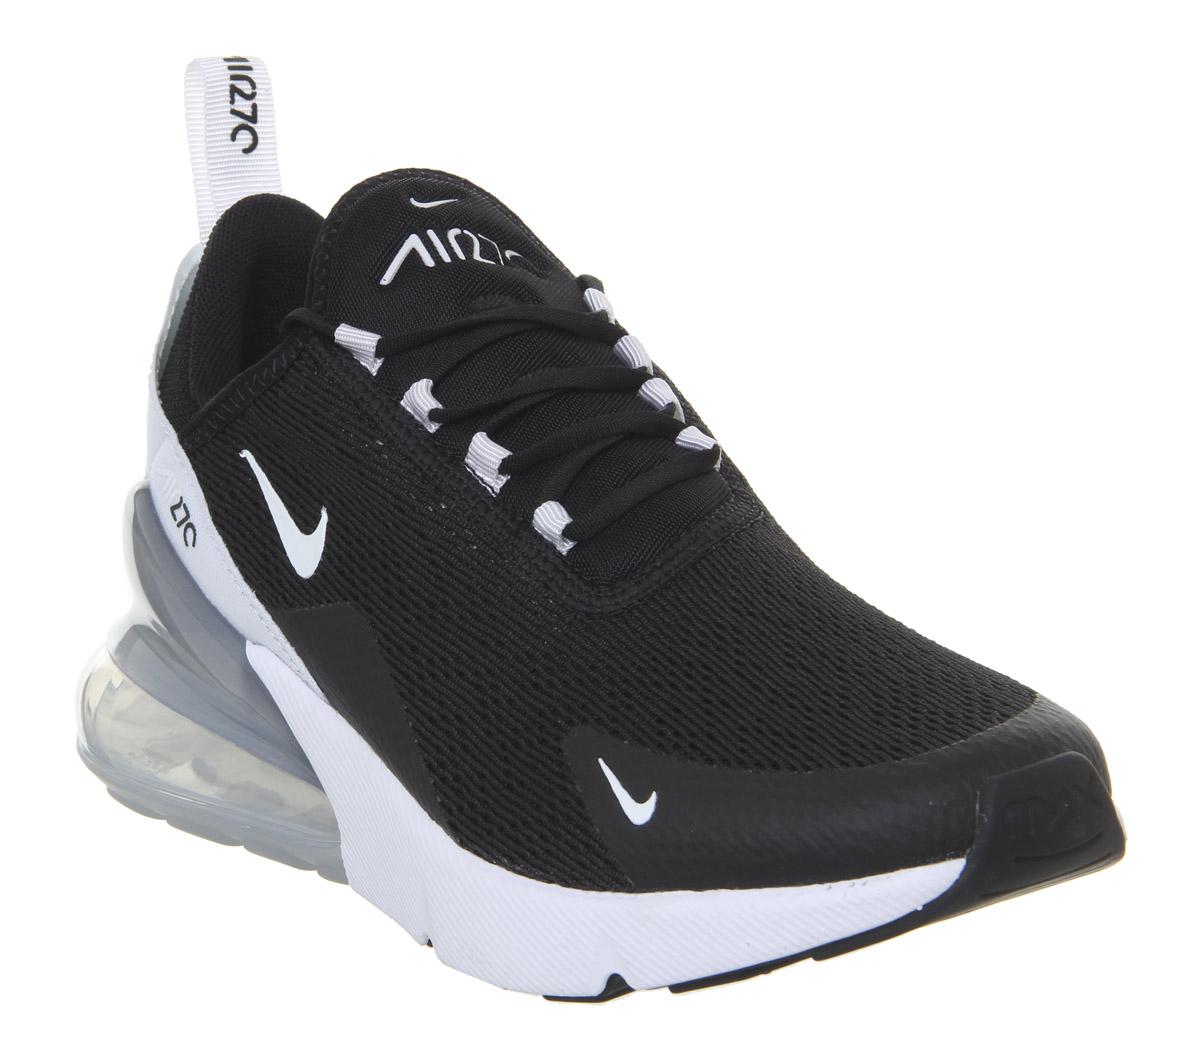 black and white nike air max trainers